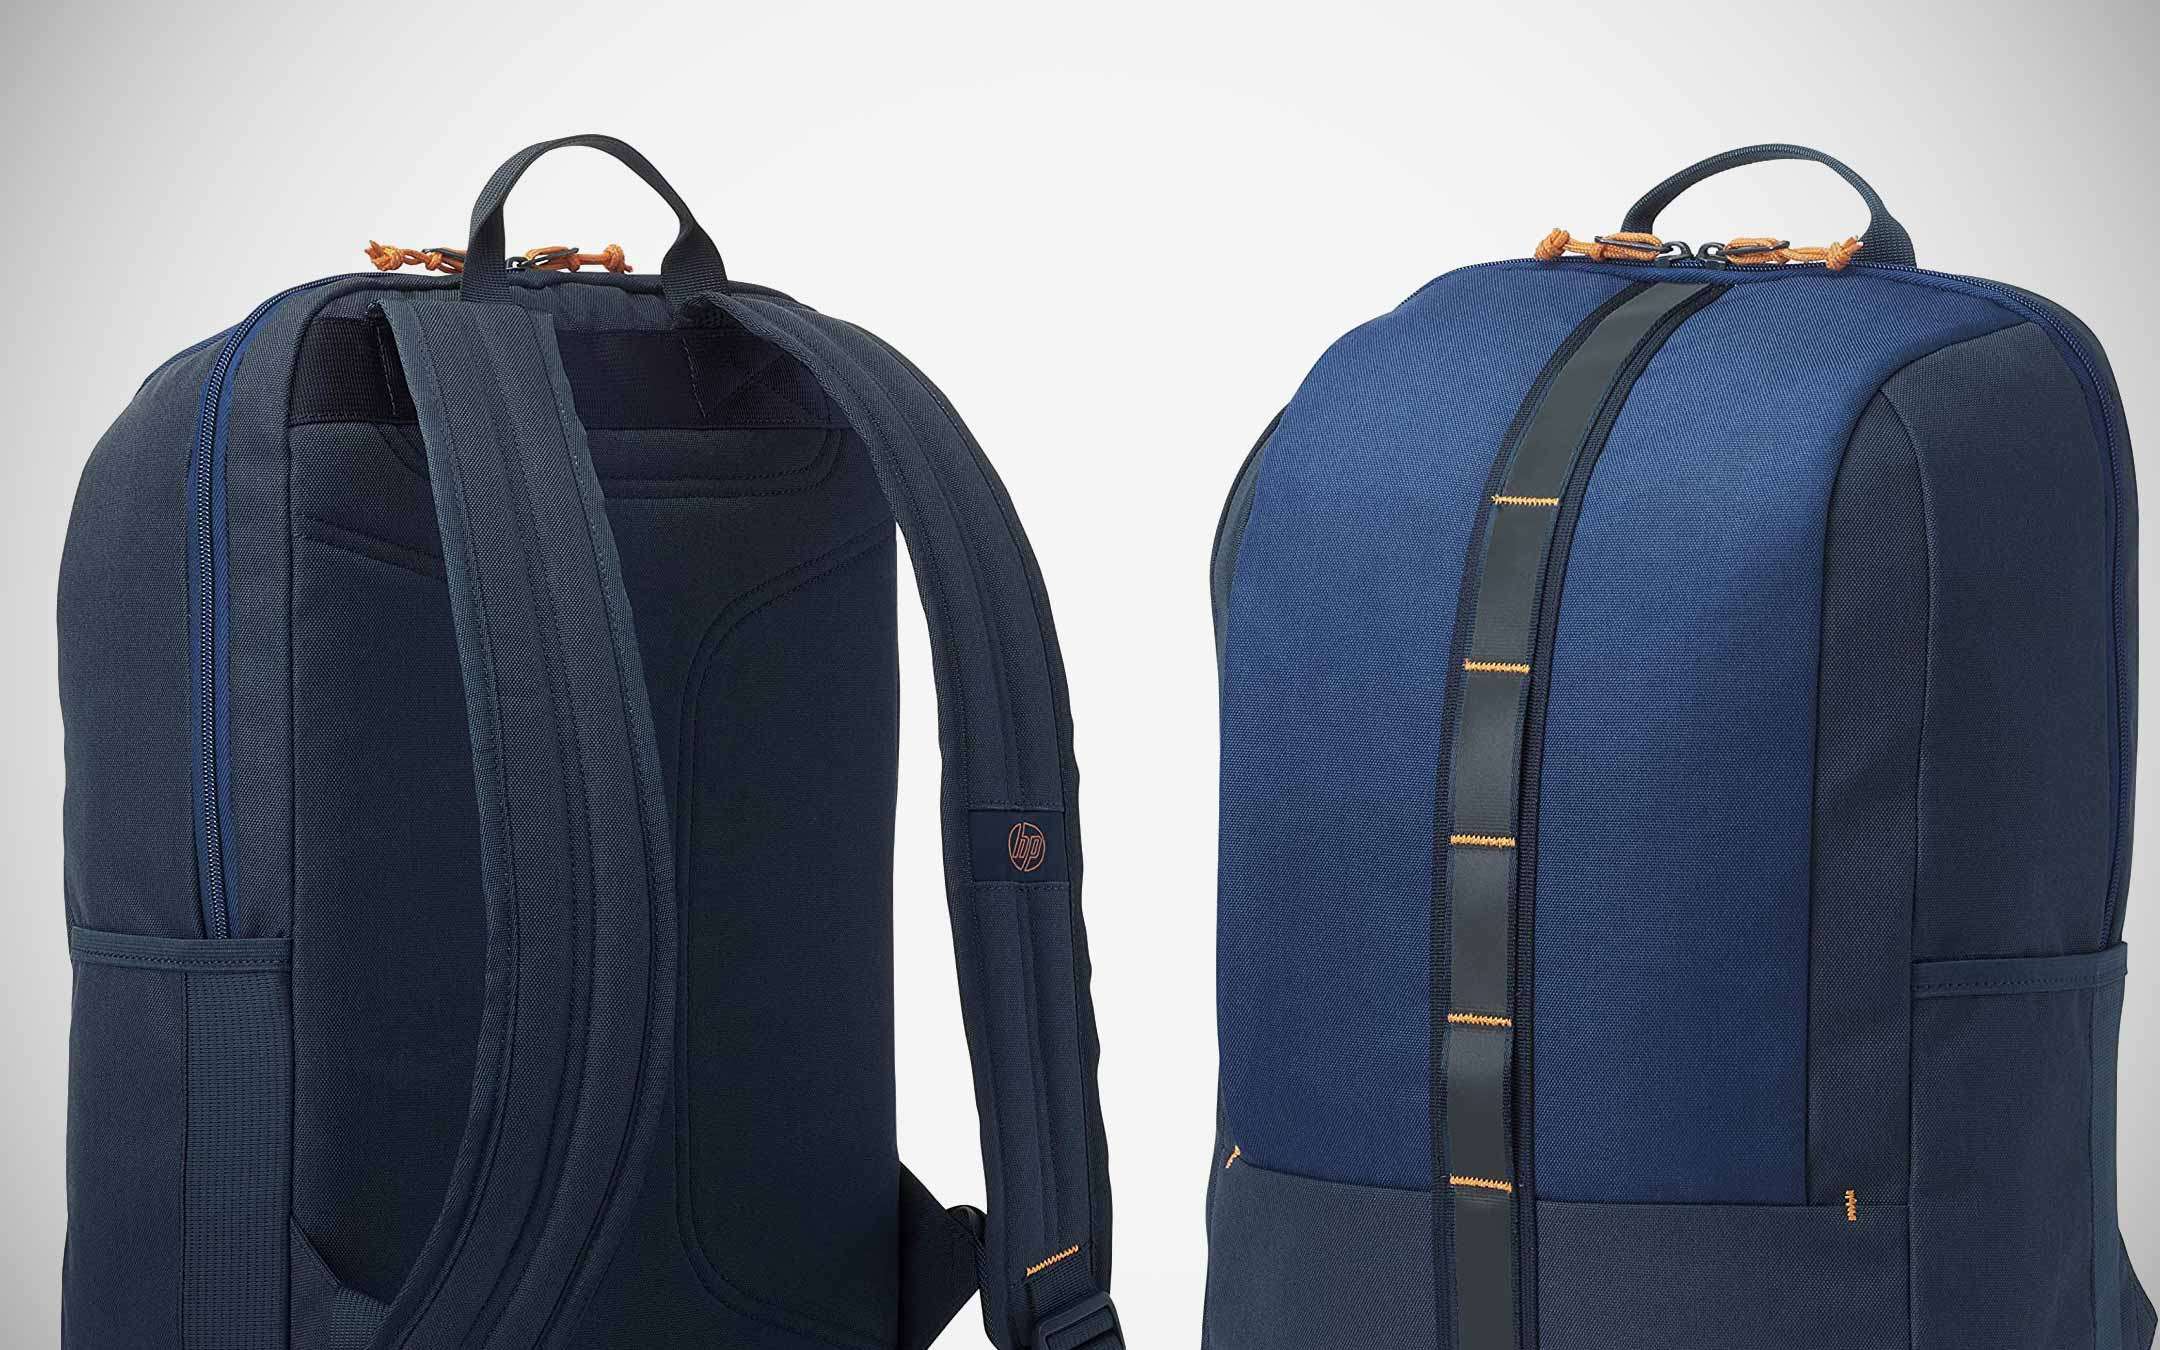 HP's backpack to take your laptop on vacation